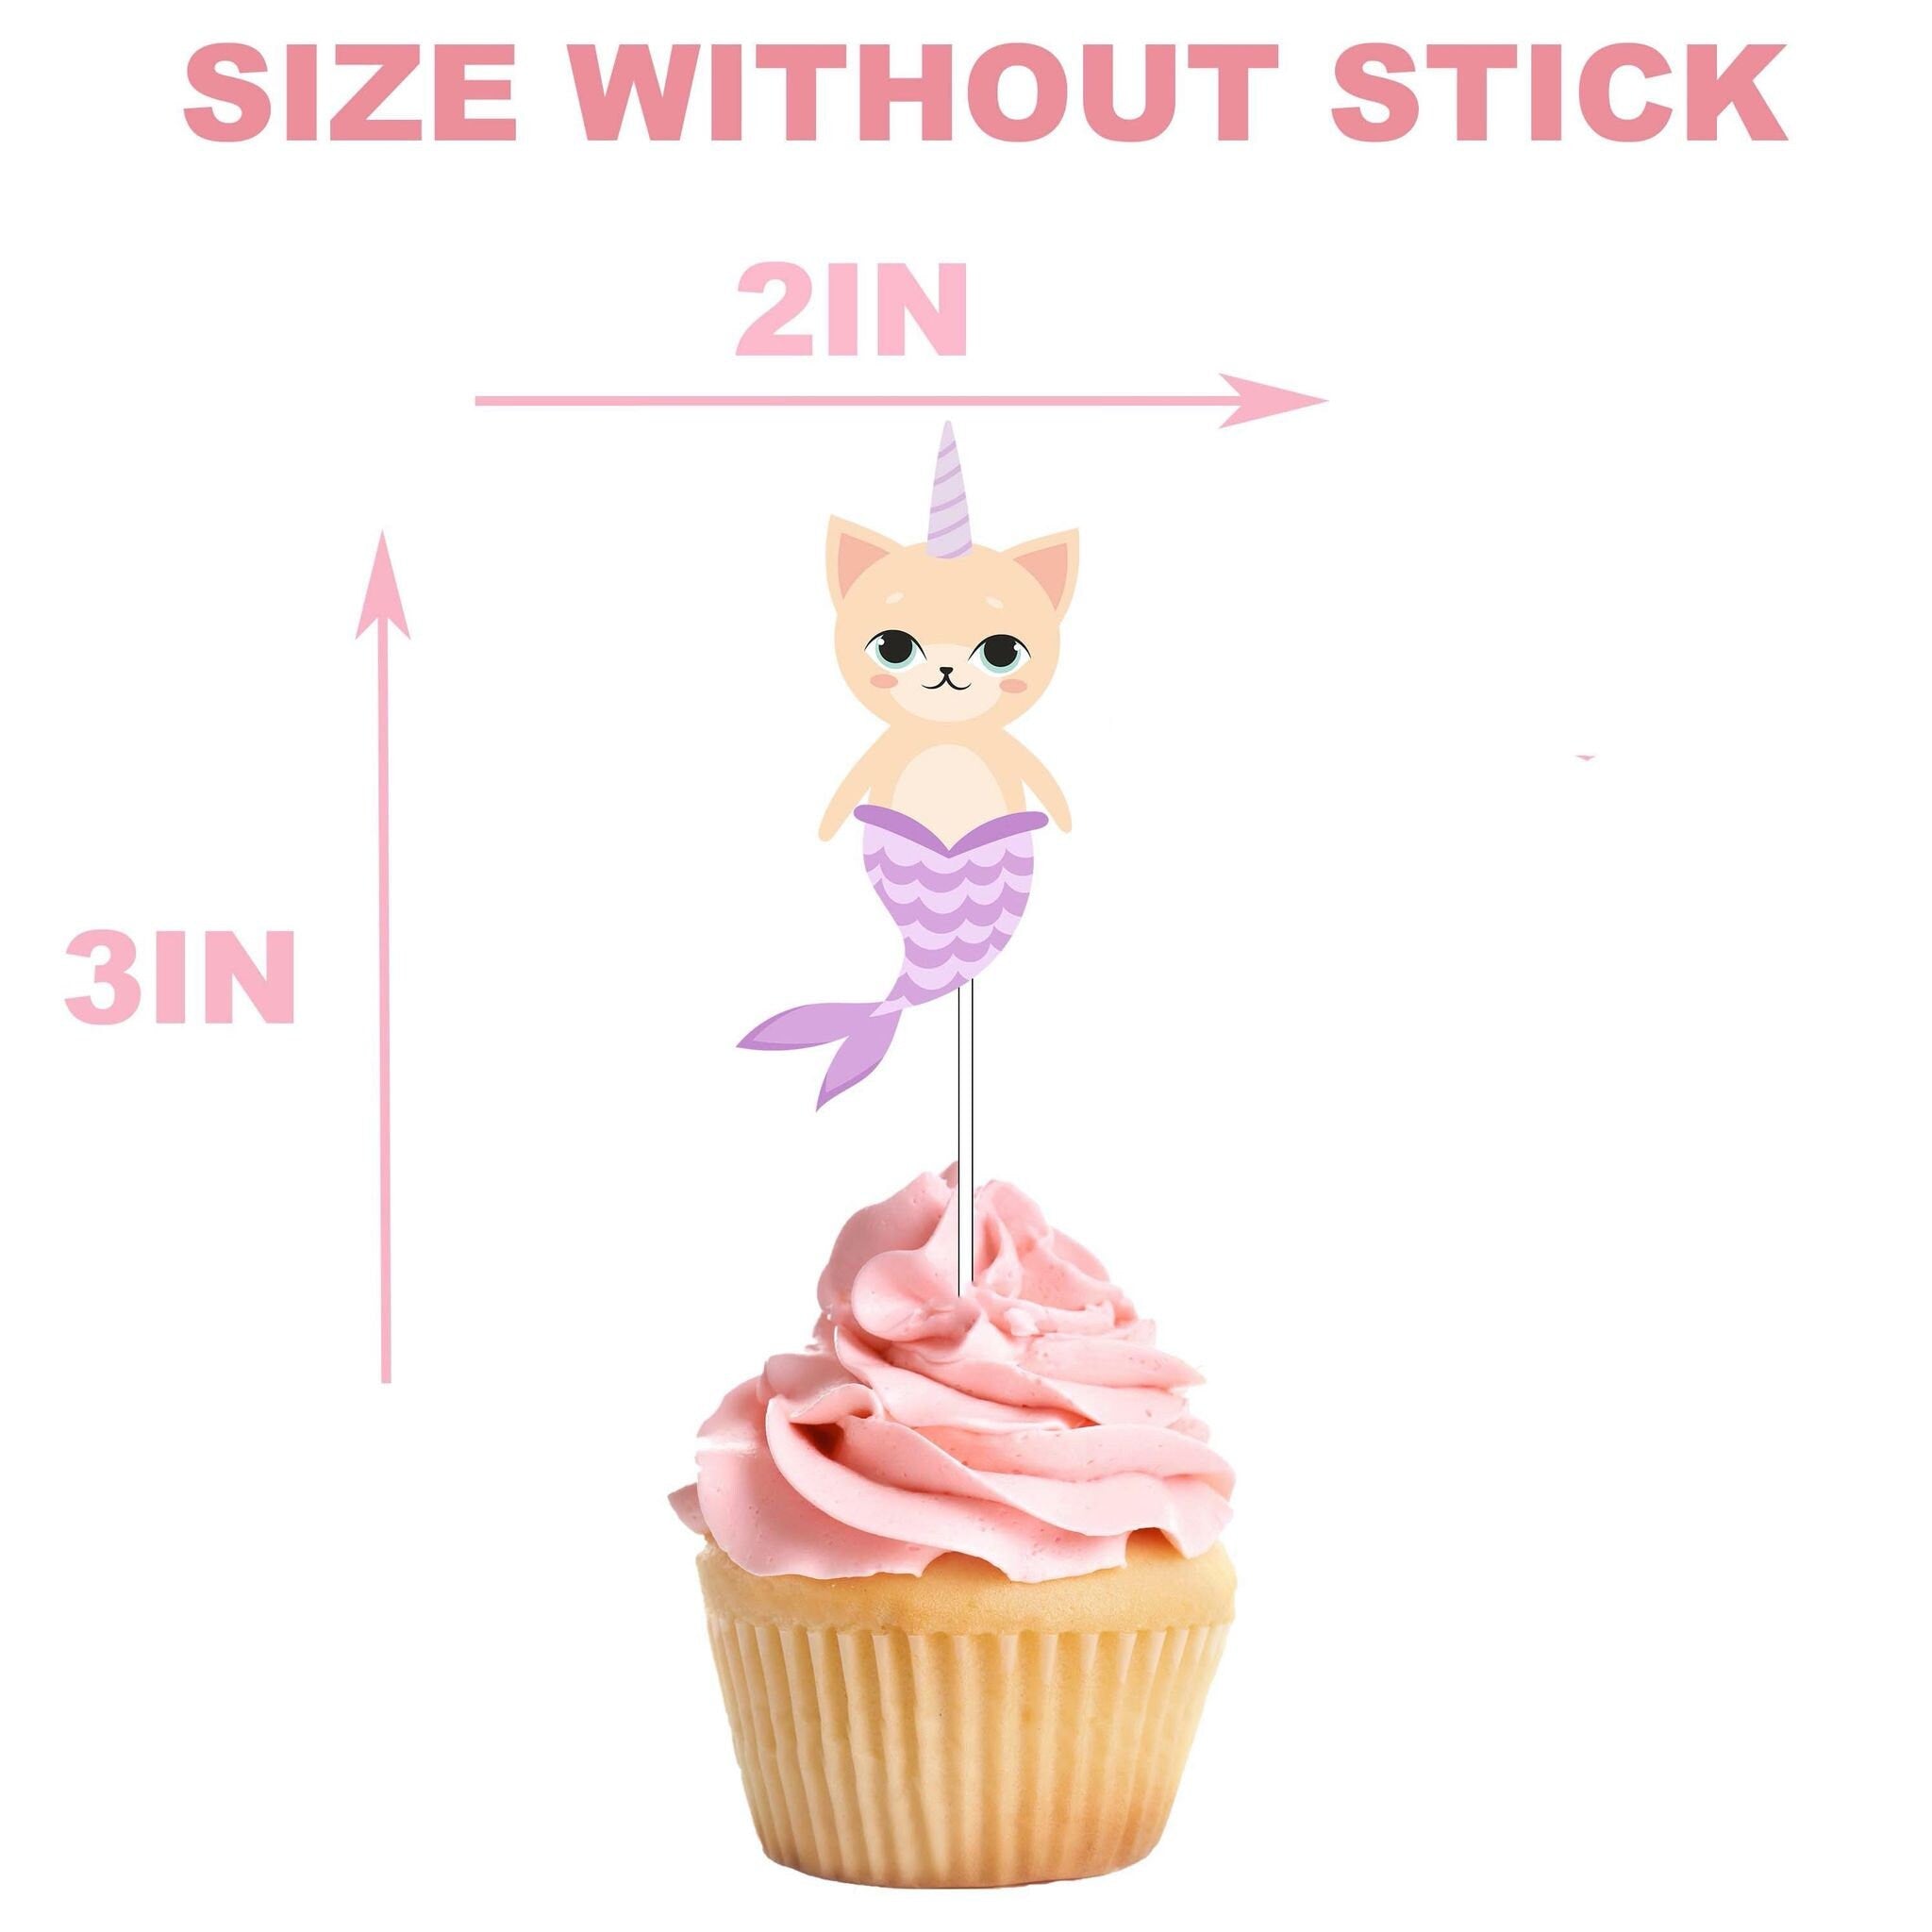 Meowmaid Mercat Cupcake Toppers - Purr-fect Under-the-Sea Charm for Your Sweets!